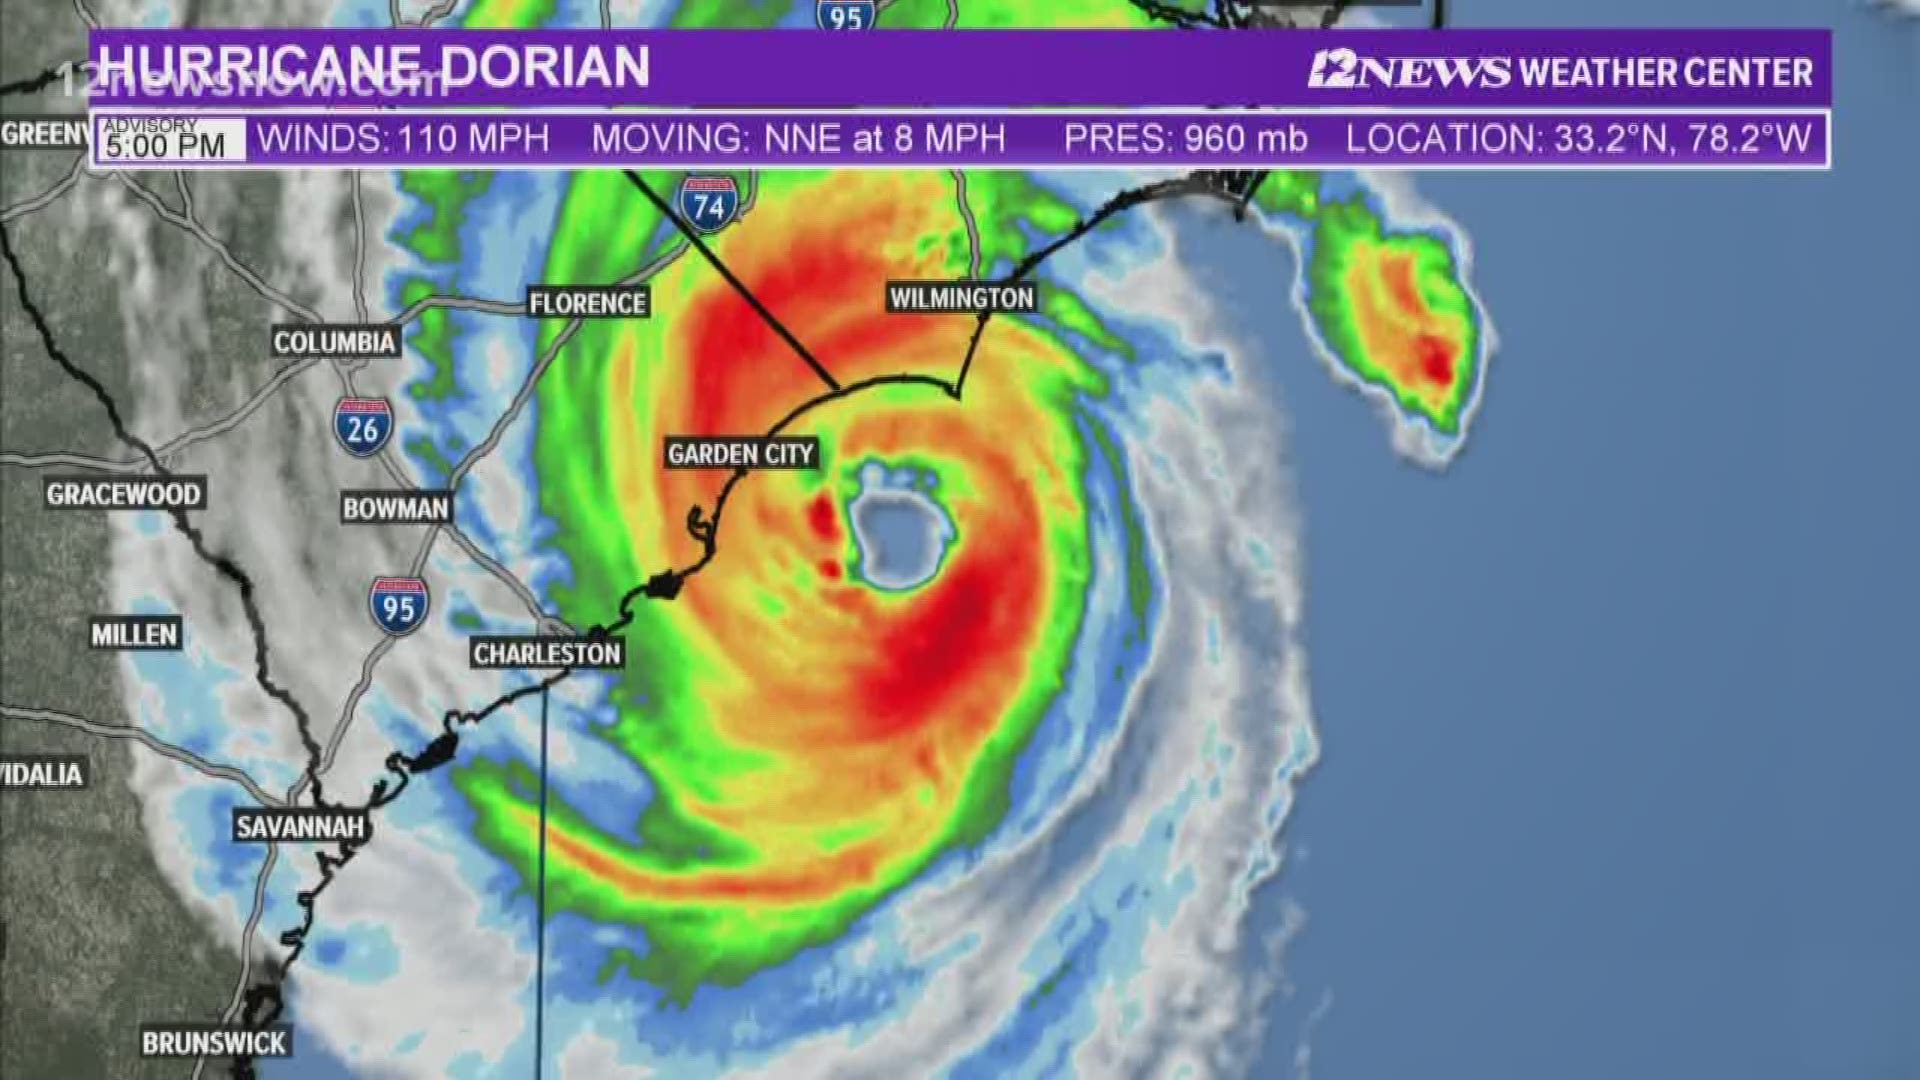 Hurricane Dorian is moving along the east coast of the U.S., causing some hazardous conditions for the coast of the Carolinas.